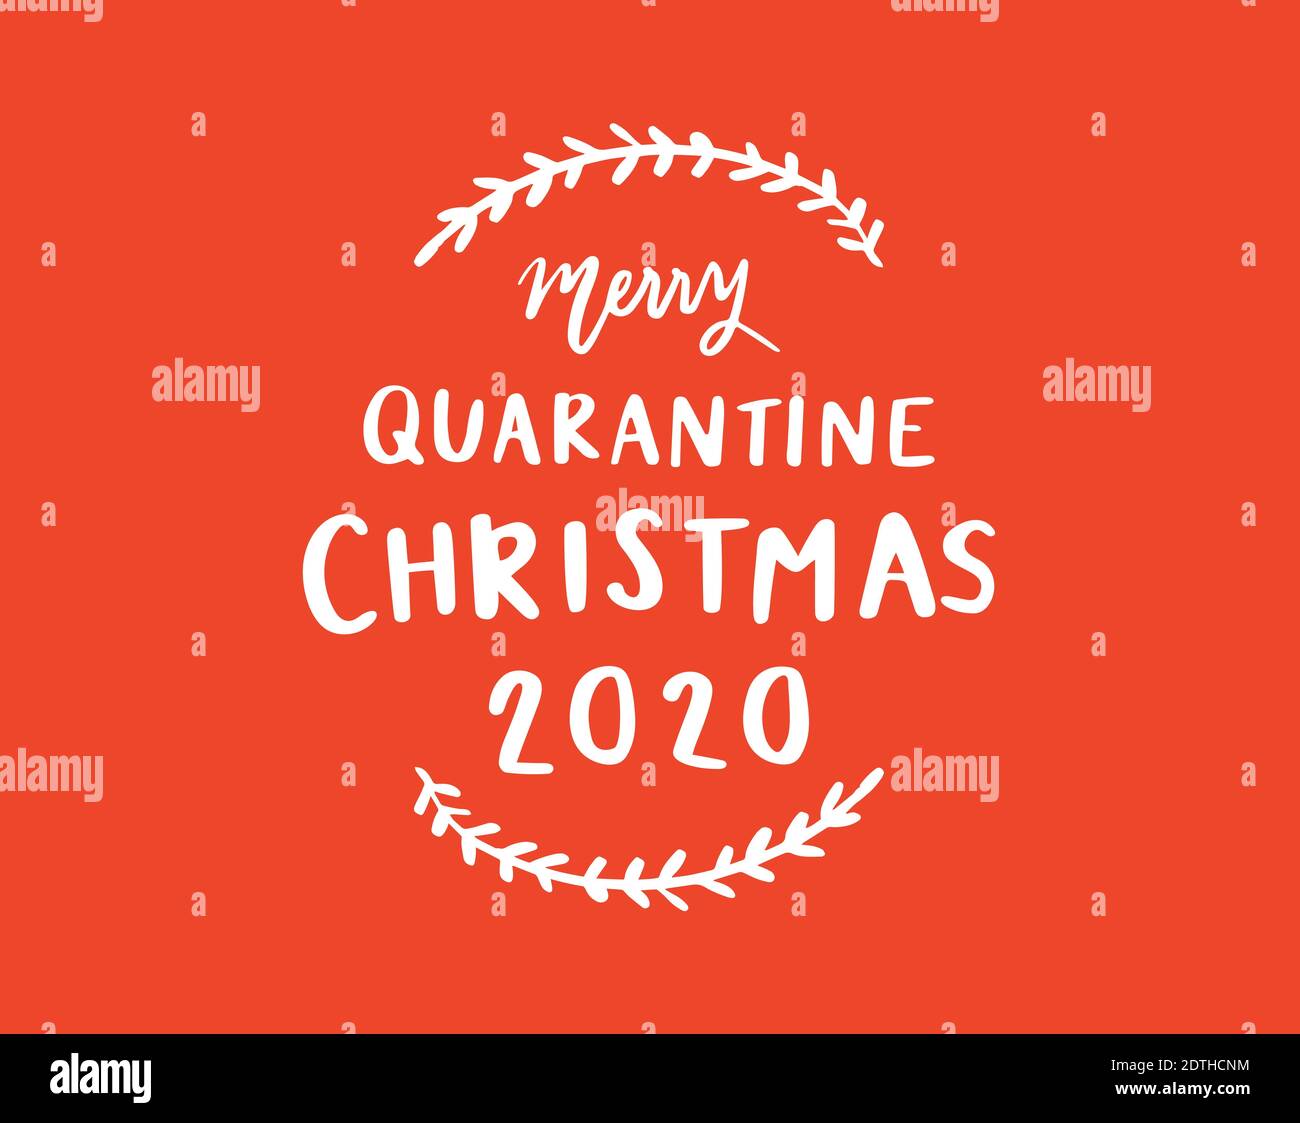 Merry quarantine Christmas 2020 hand drawn text on colorful orange background Stock Vector